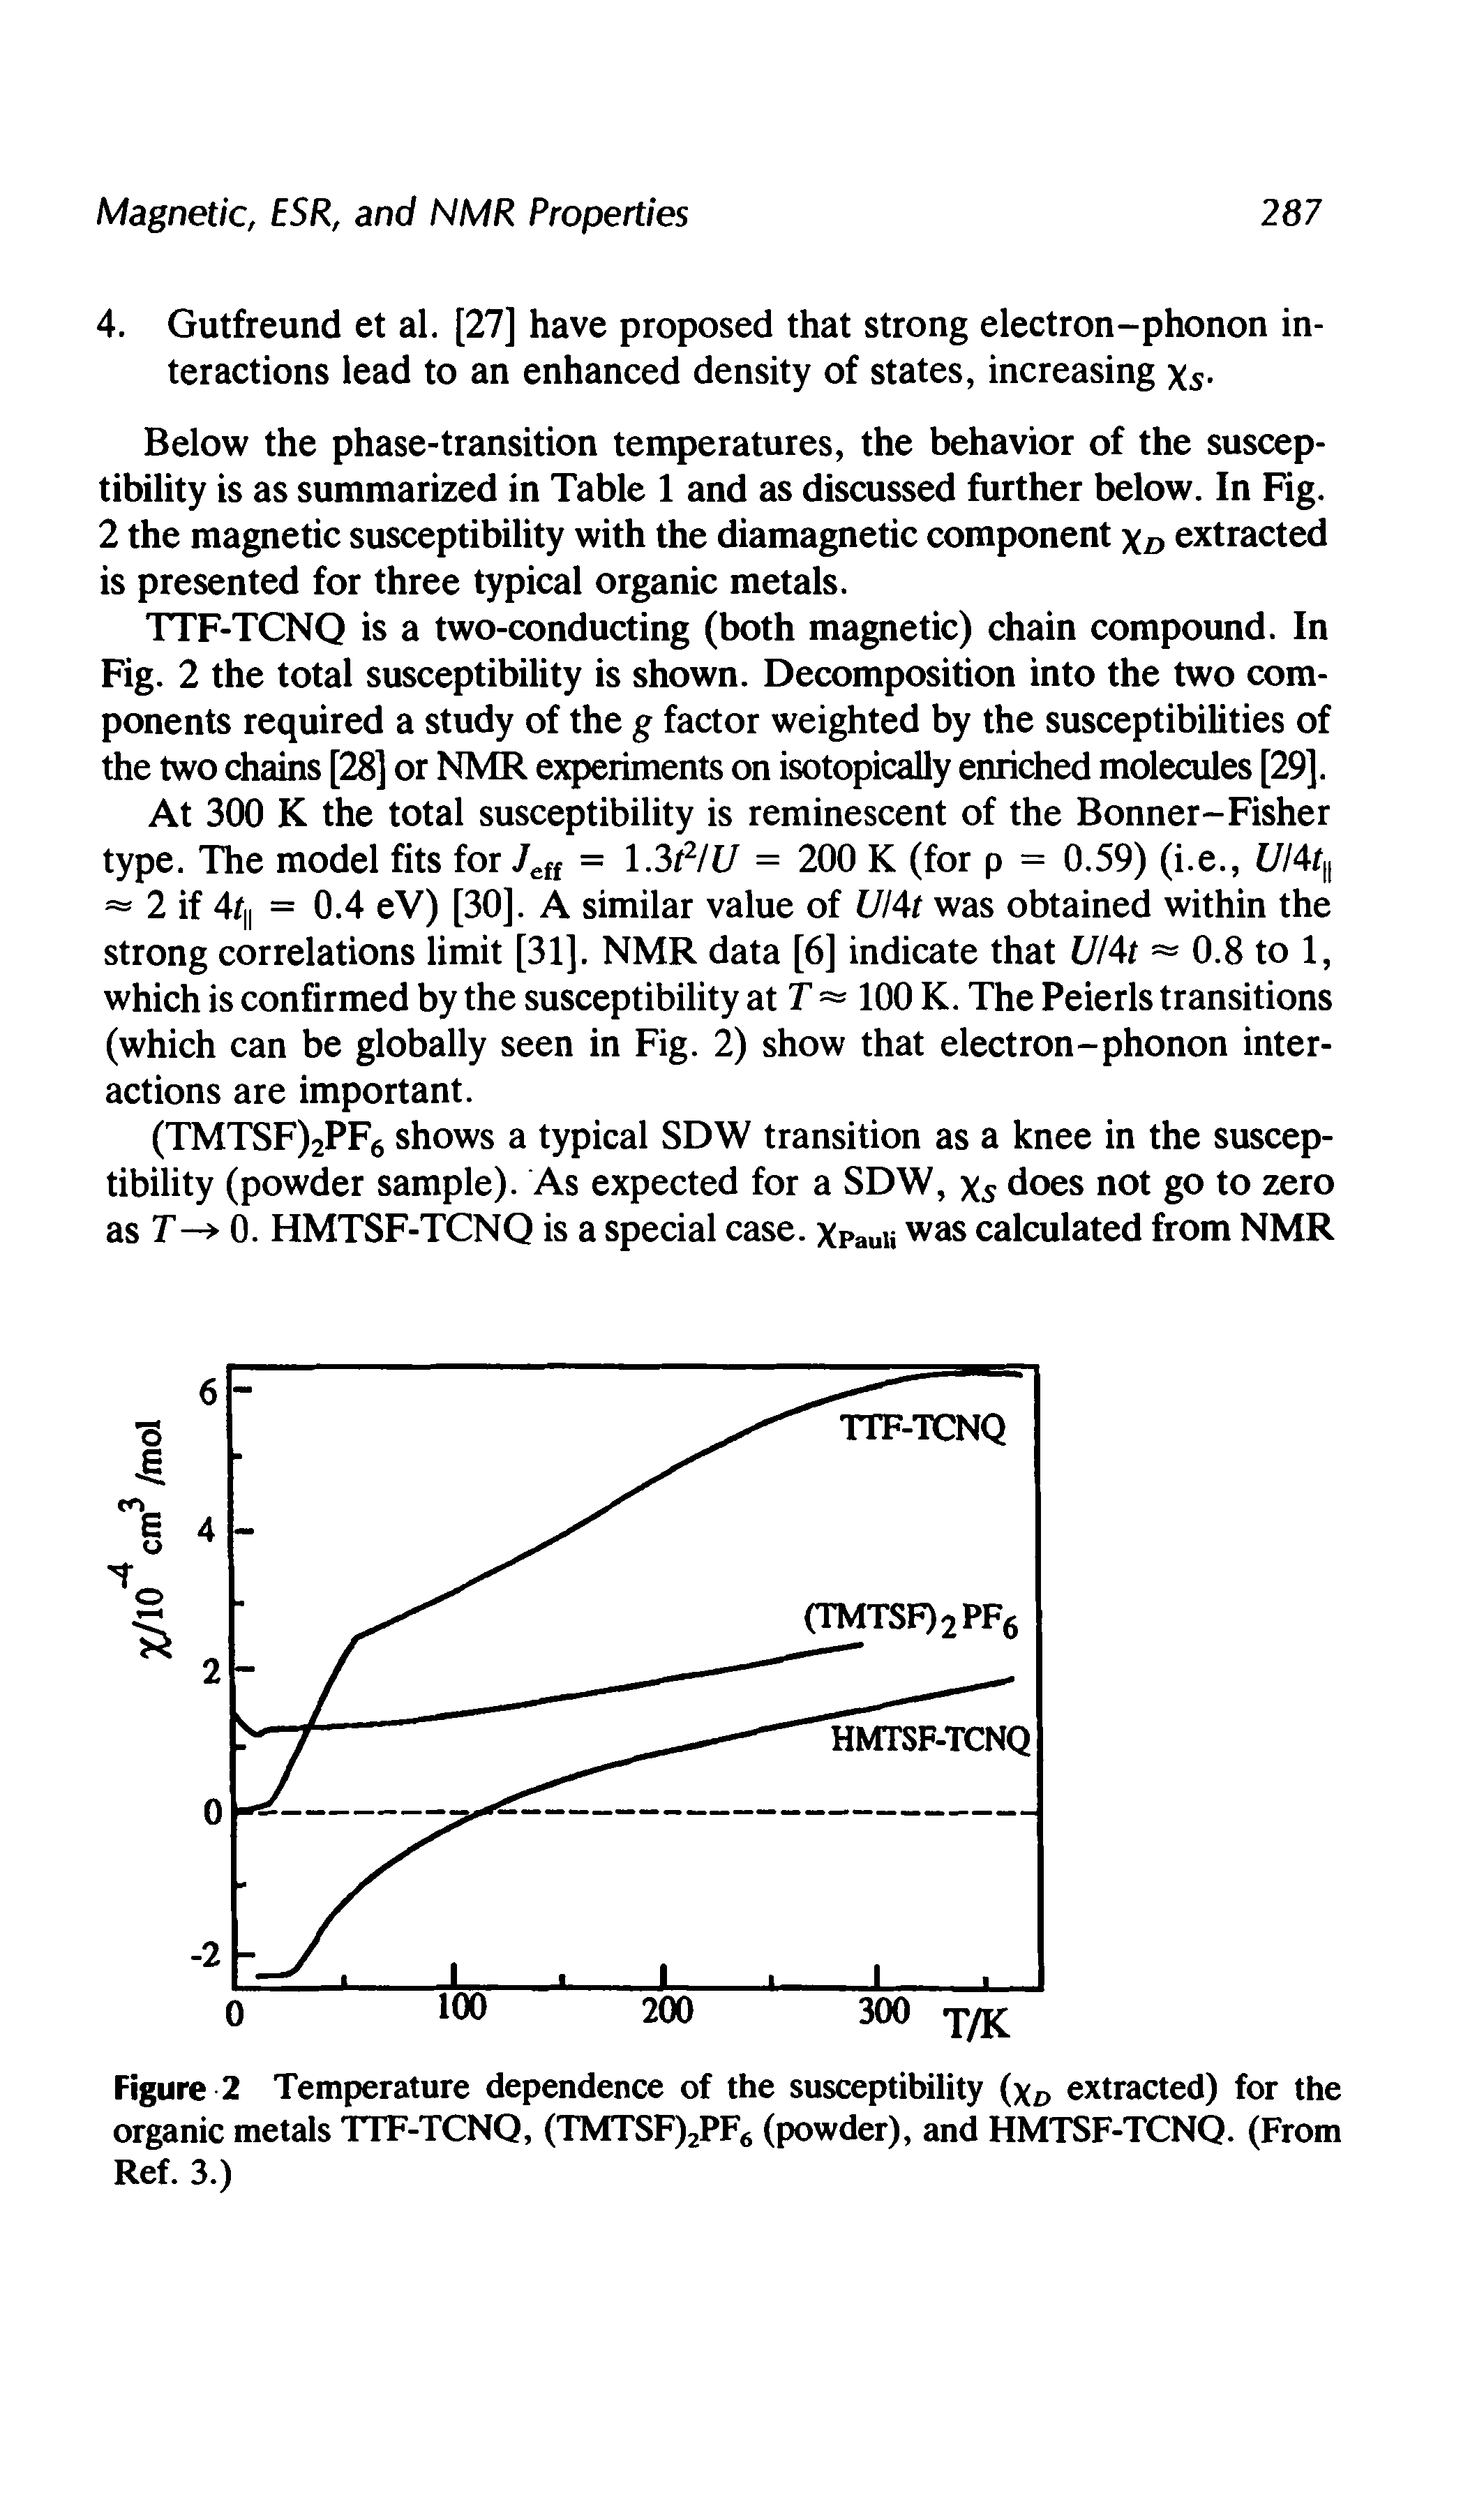 Figure 2 Temperature dependence of the susceptibility (xD extracted) for the organic metals TTF-TCNQ, (TMTSF)2PF6 (powder), and HMTSF-TCNQ. (From Ref. 3.)...